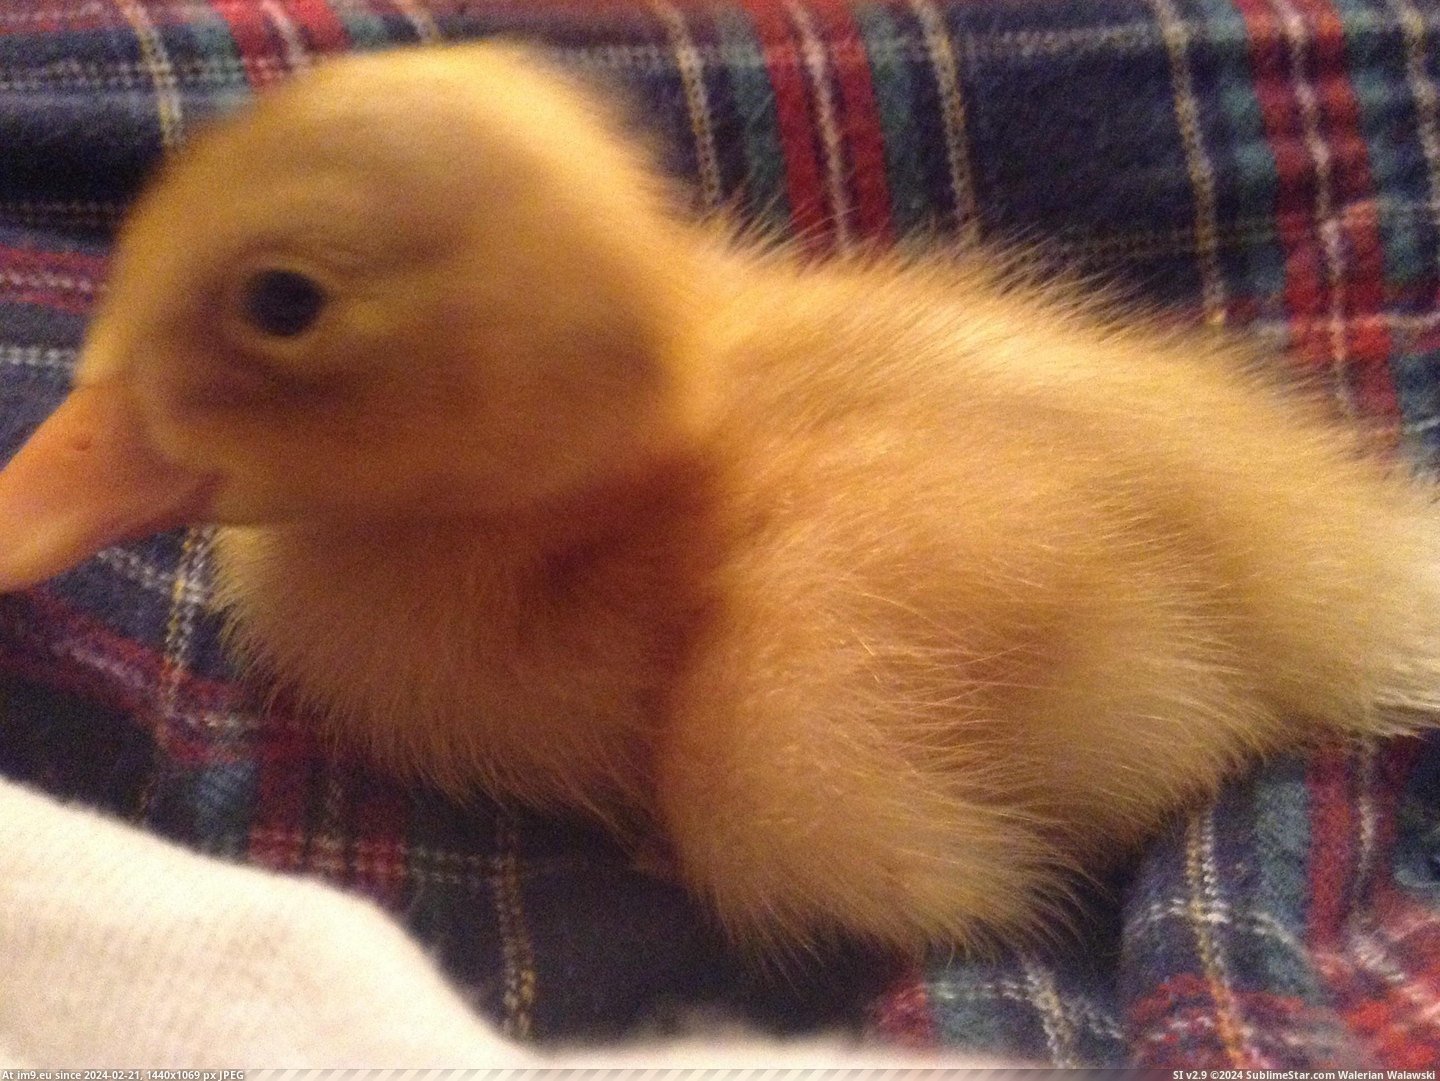 #Baby #Duck #Popularity #Excited #Stanley [Aww] My baby duck Stanley was excited for all the popularity, so here are some more pictures! 4 Pic. (Bild von album My r/AWW favs))